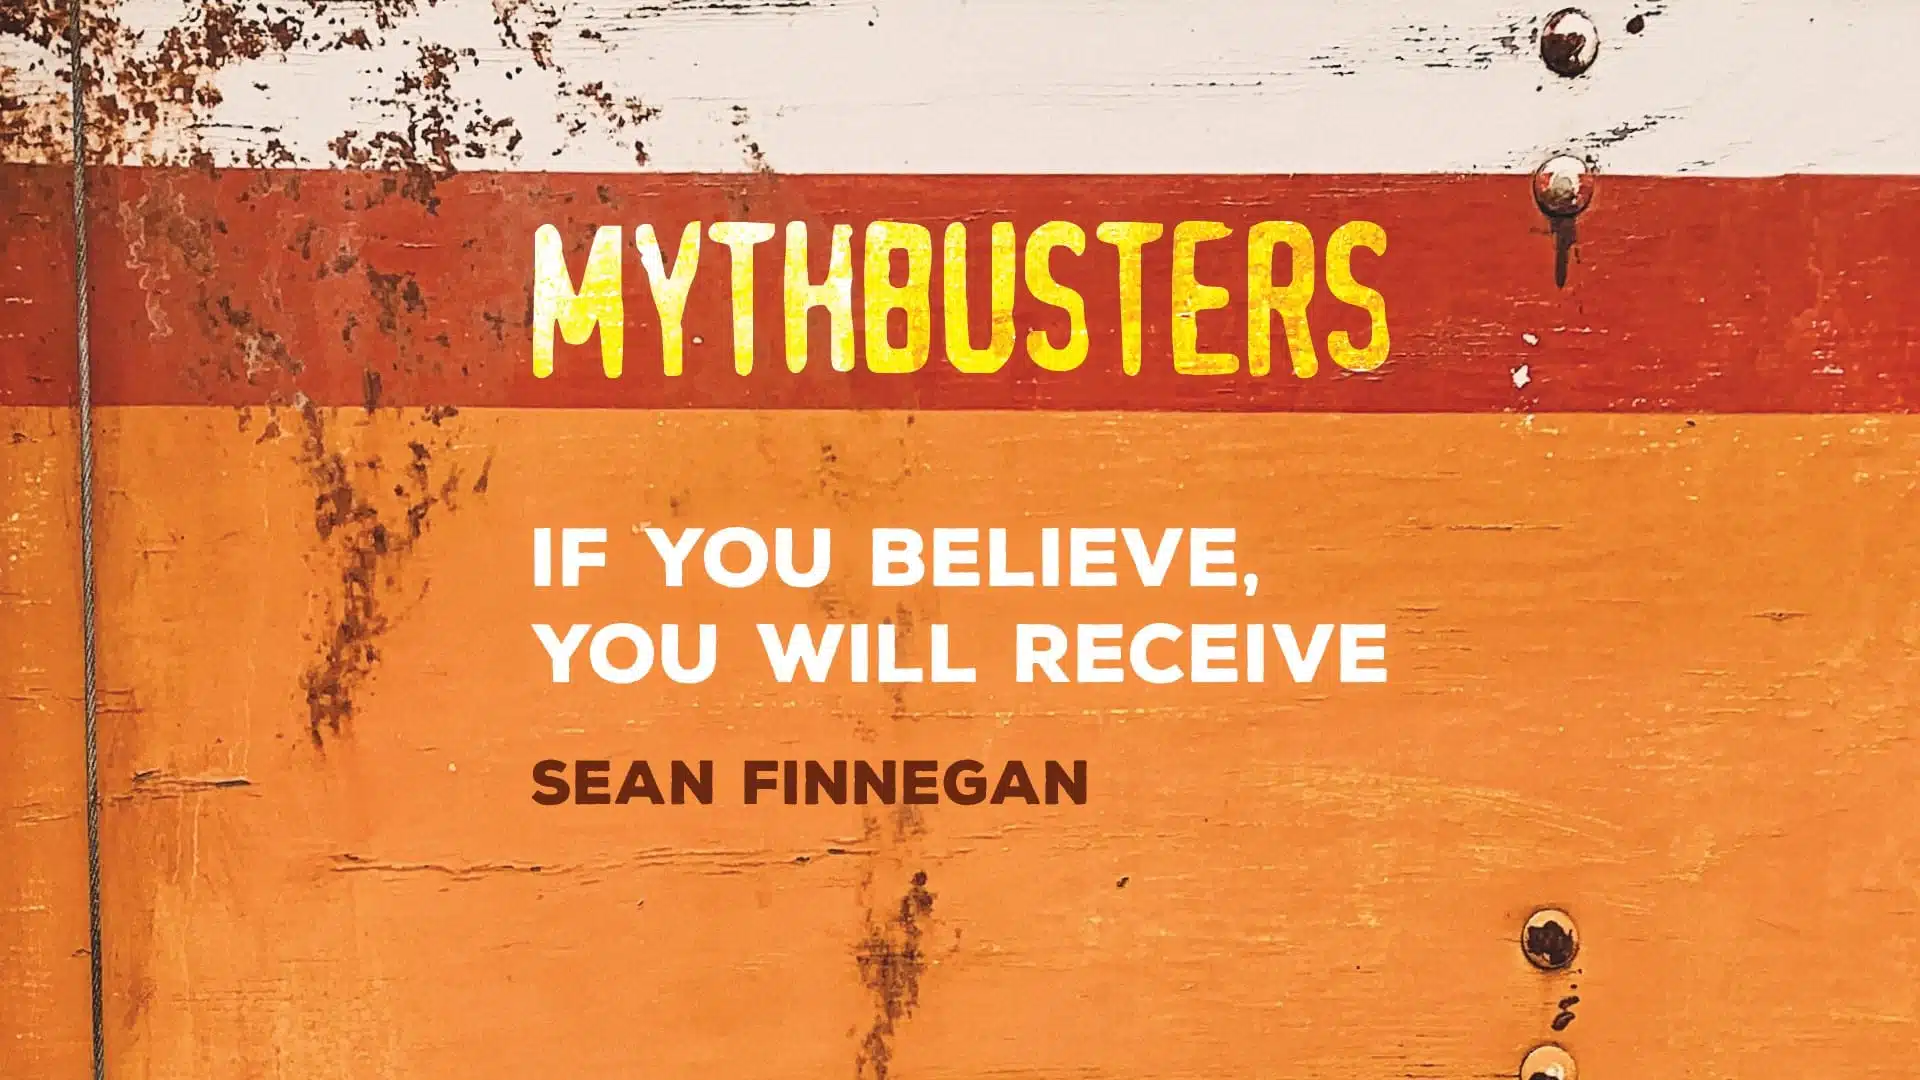 Myth: If You Believe, You Will Receive